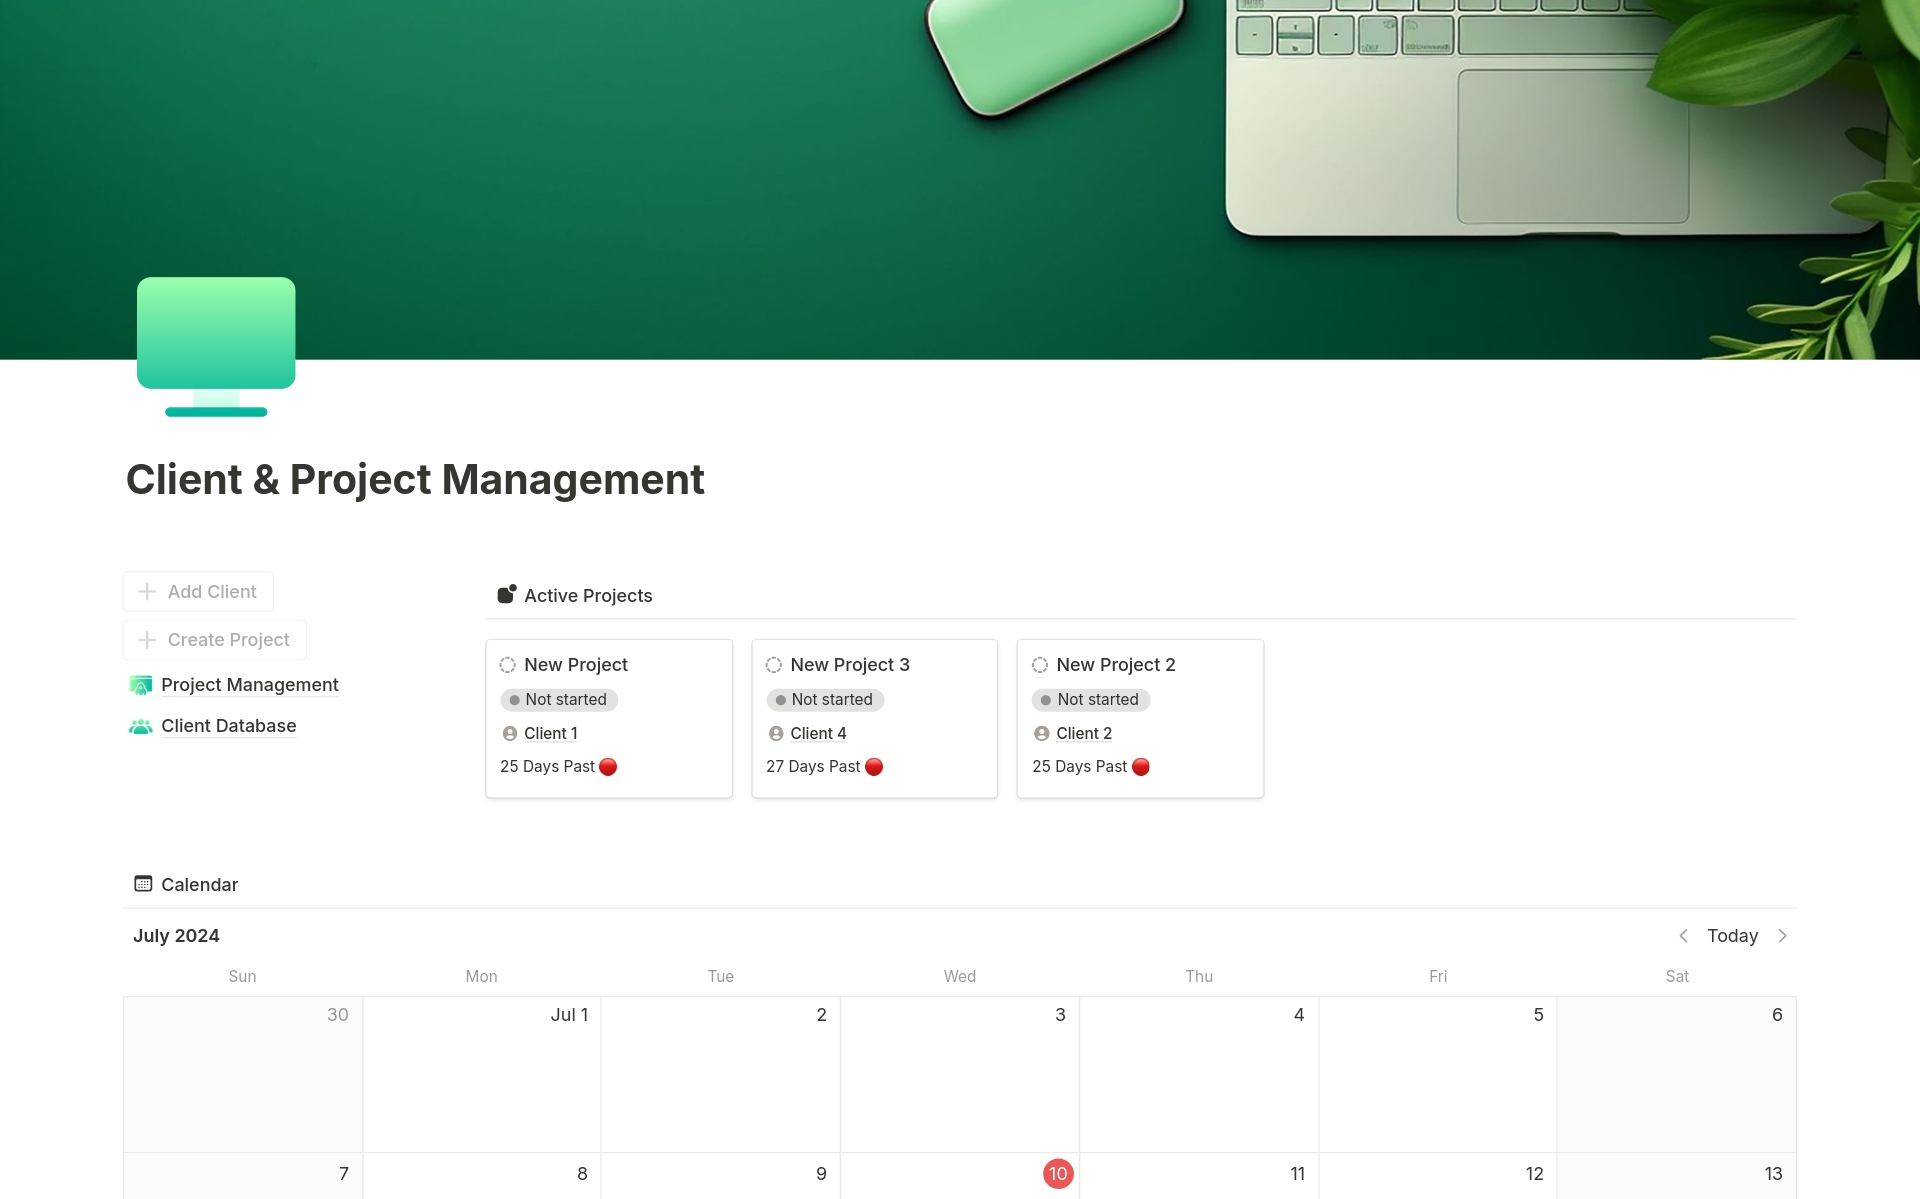 The user-friendly interface of this template will speed up your client and project management. As a result, you will be able to save time and be more productive.